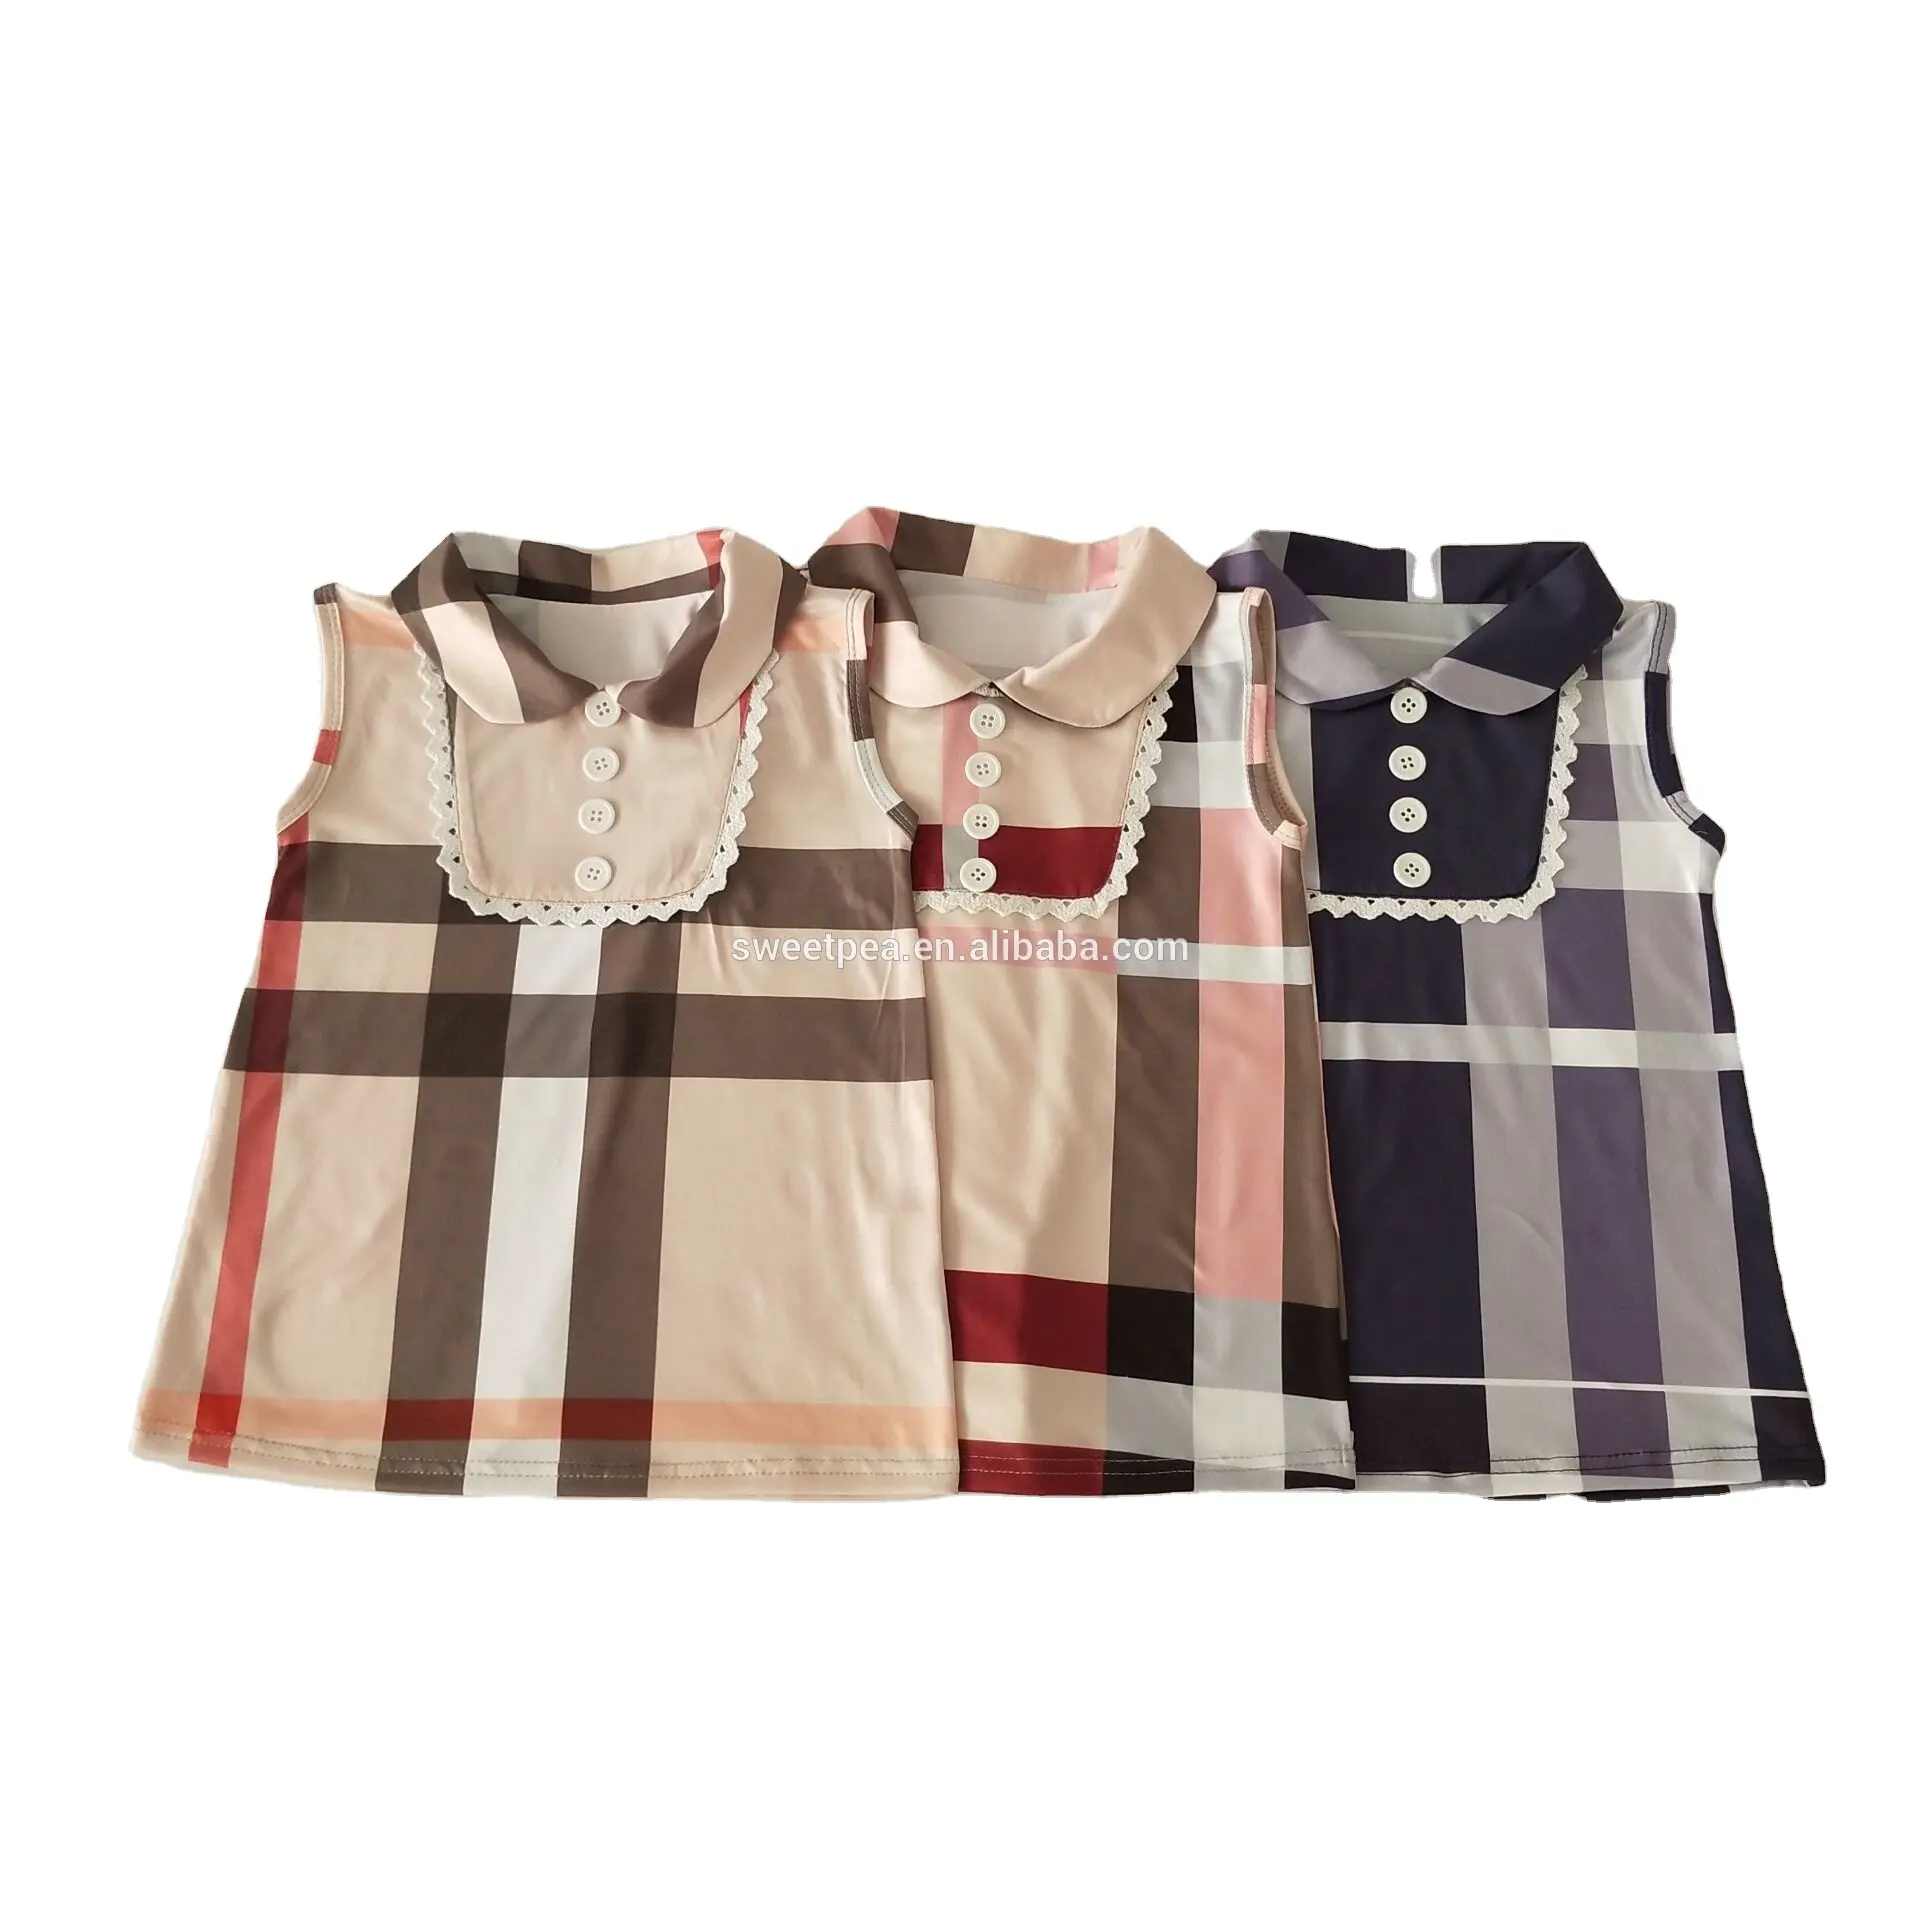 Wholesale Toddler Clothing Plaid Skirt Kids Tops clothes Sleeveless Baby Girls Dresses